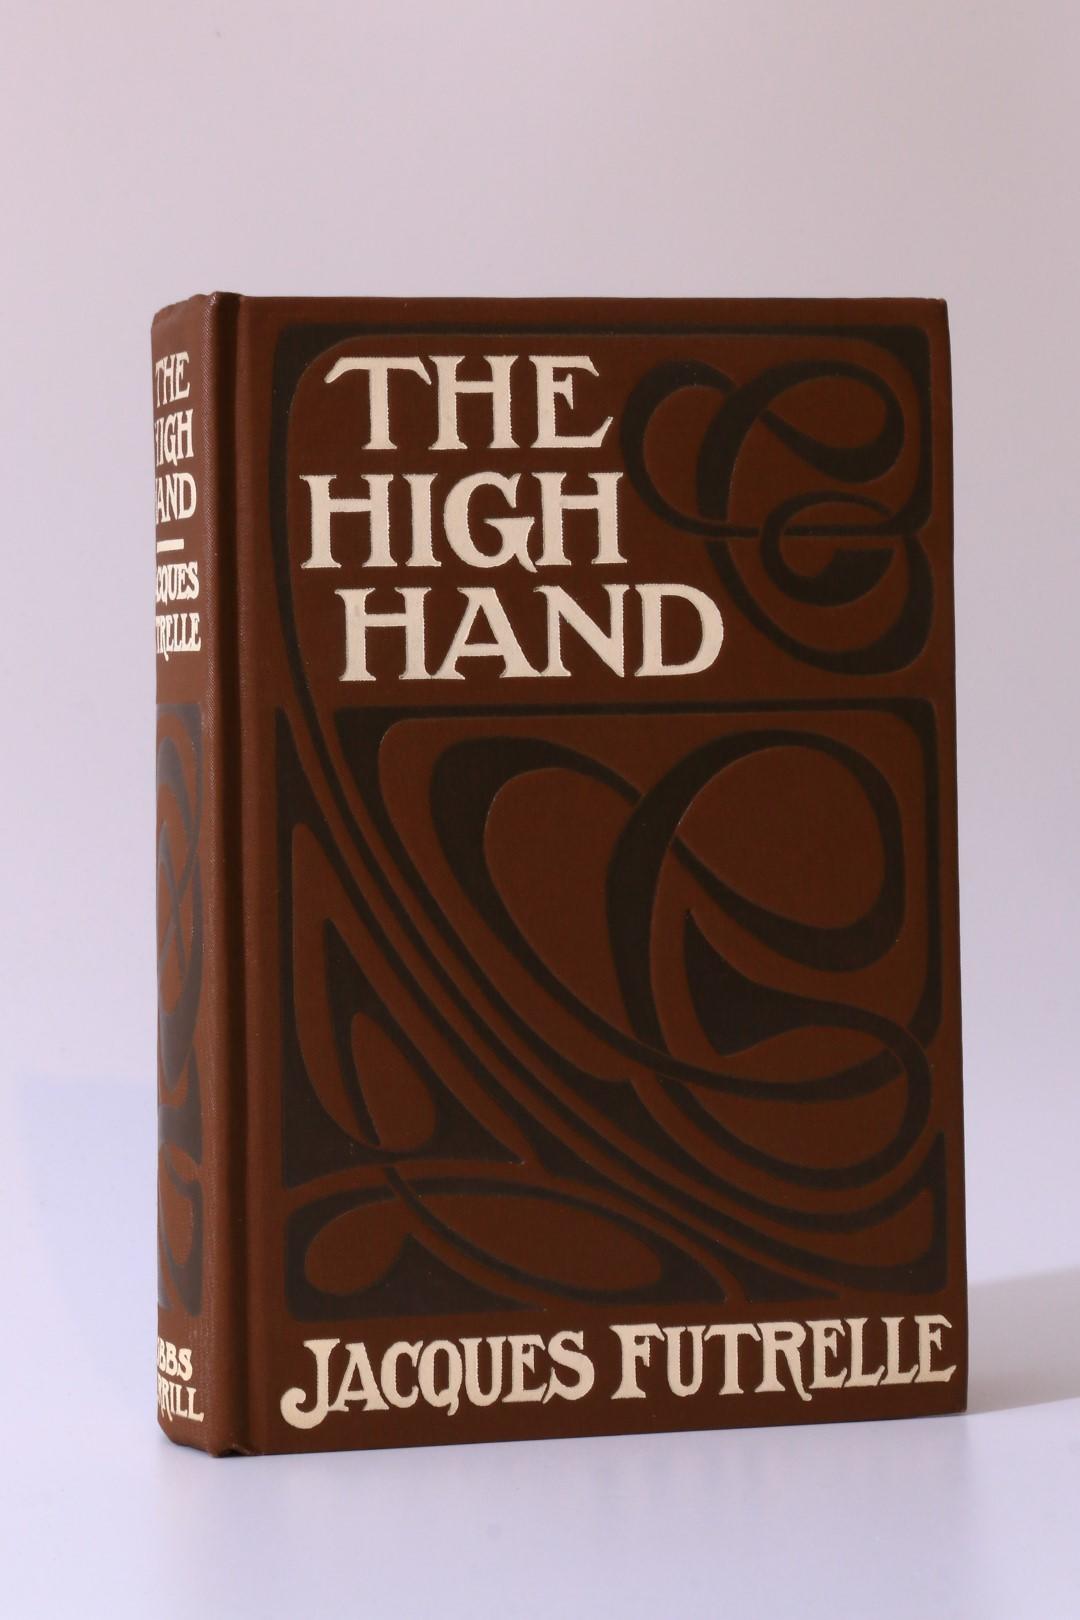 Jacques Futrelle - The High Hand - Bobbs Merrill, 1911, First Edition.